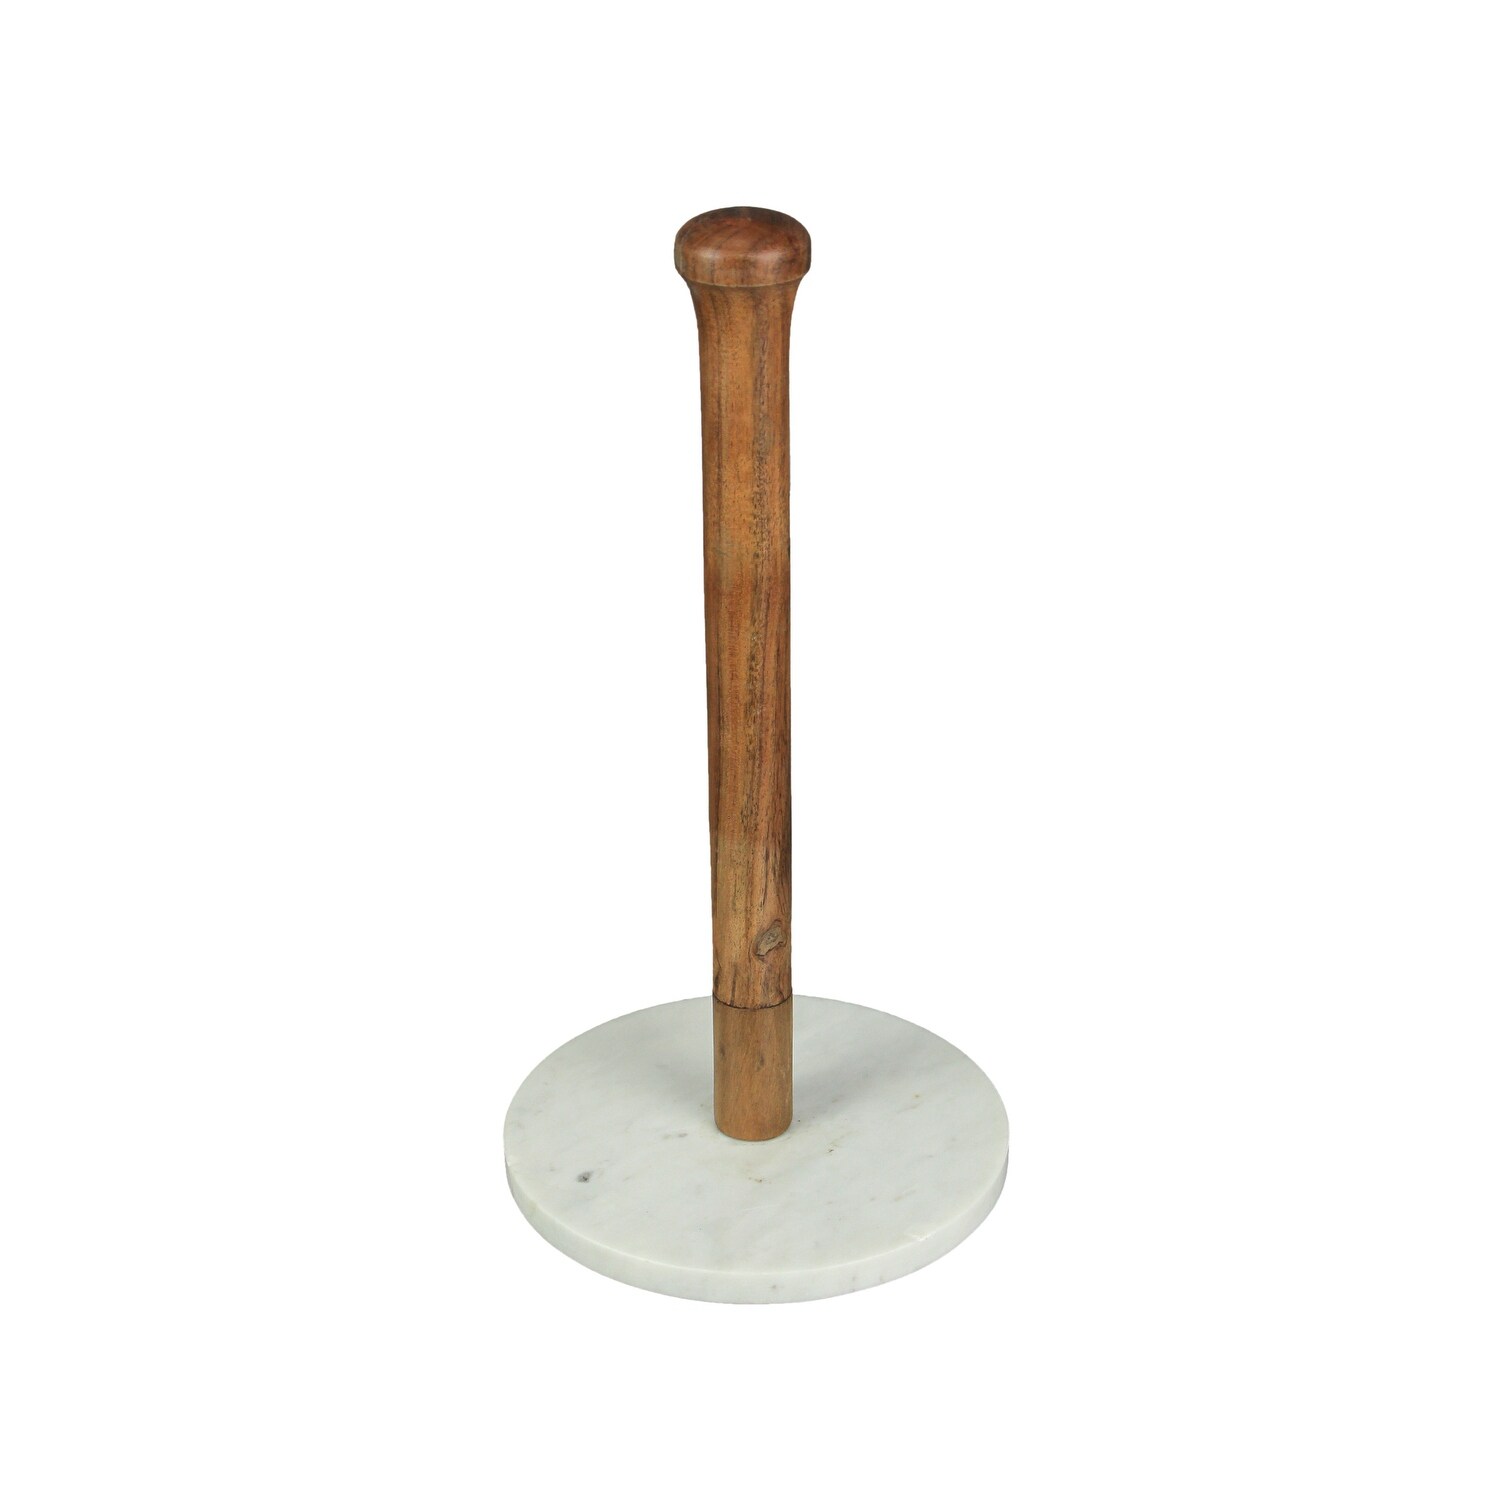 Marble Wood Standing Paper Towel Holder Countertop Kitchen Decor